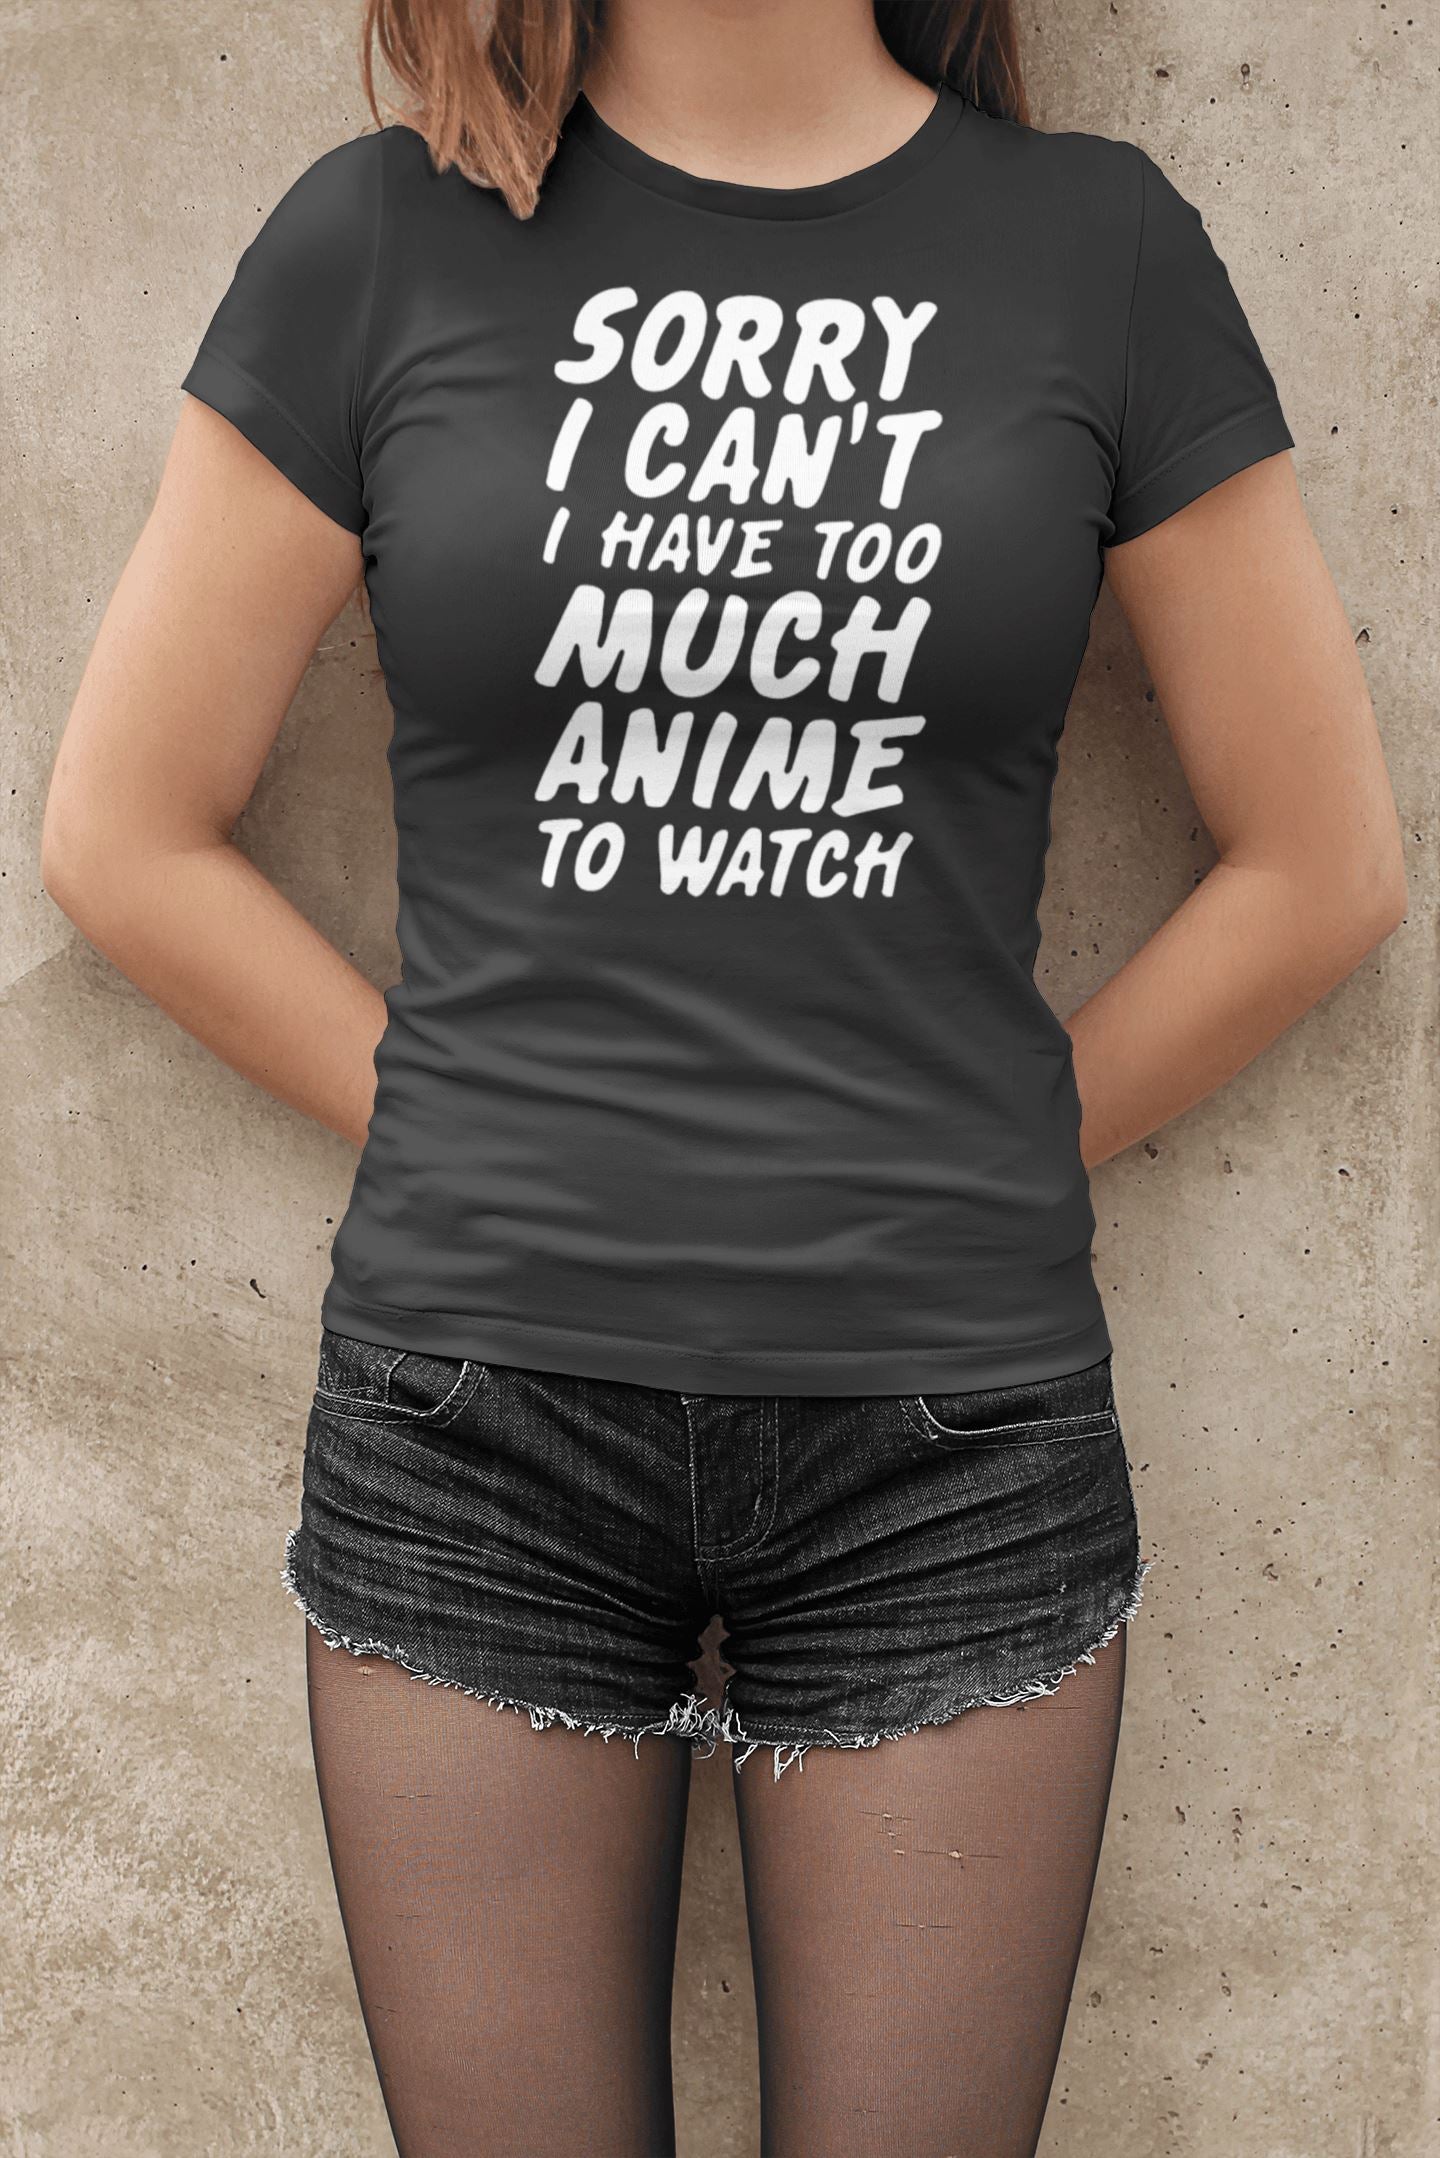 Sorry I Can't I Have Too Much Anime To Watch Funny Black T Shirt for Men and Women Printrove 